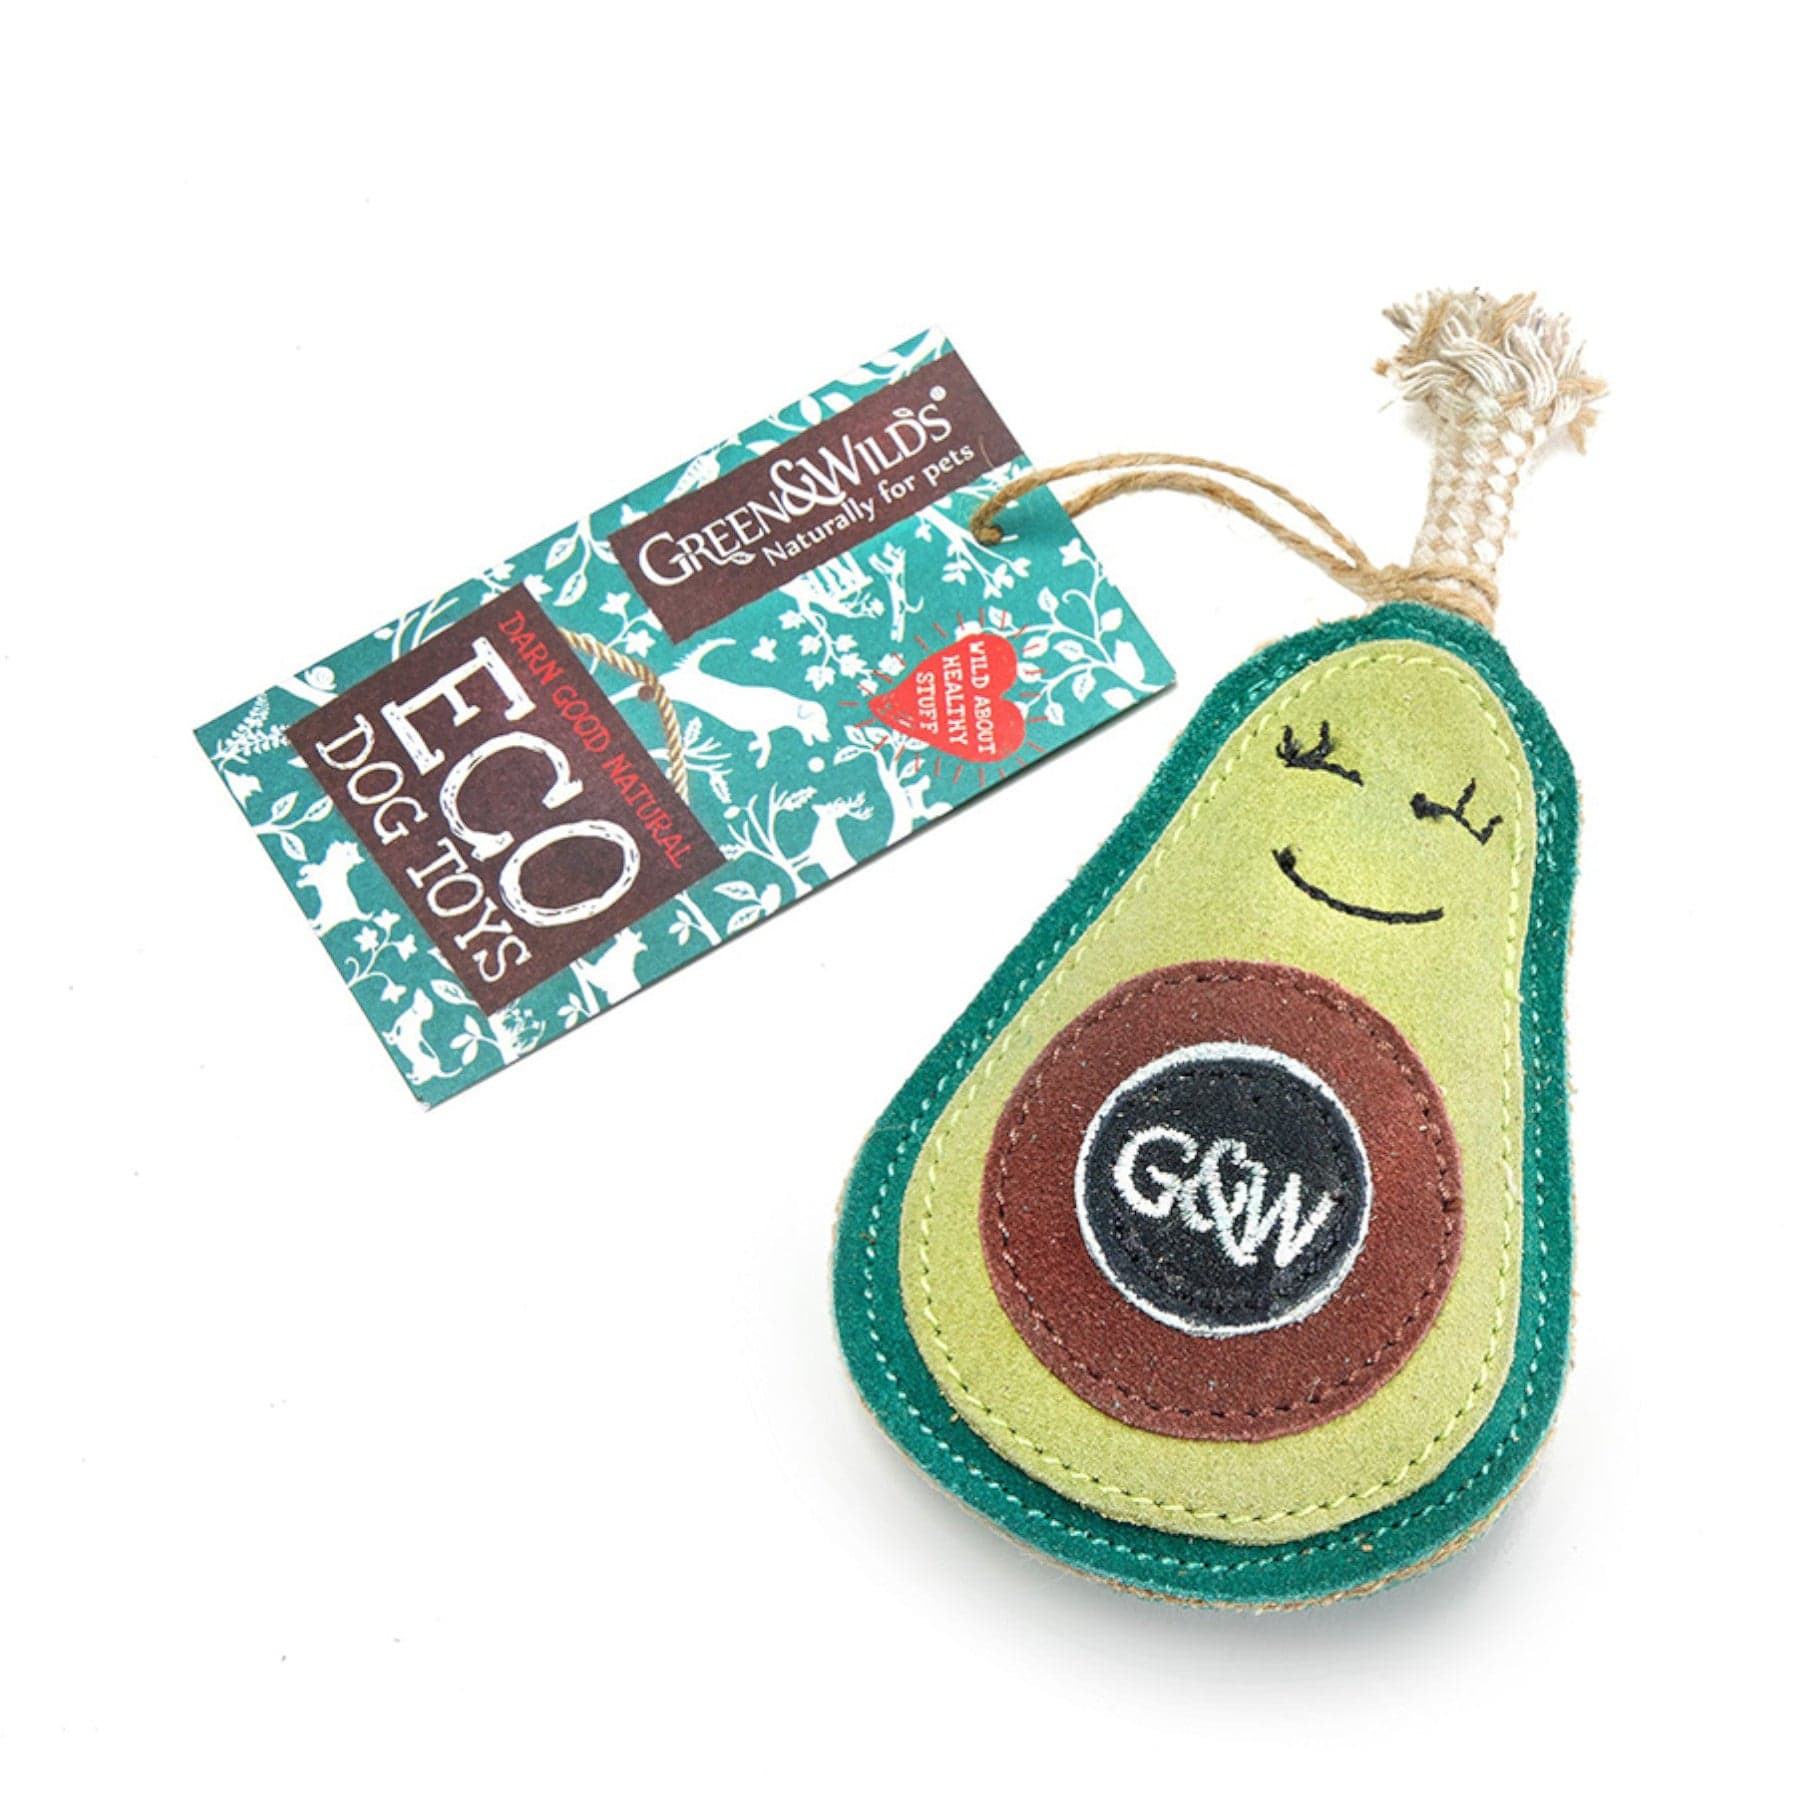 Eco-friendly avocado-shaped dog toy with happy face and Green & Wilds branding tag indicating natural pet products